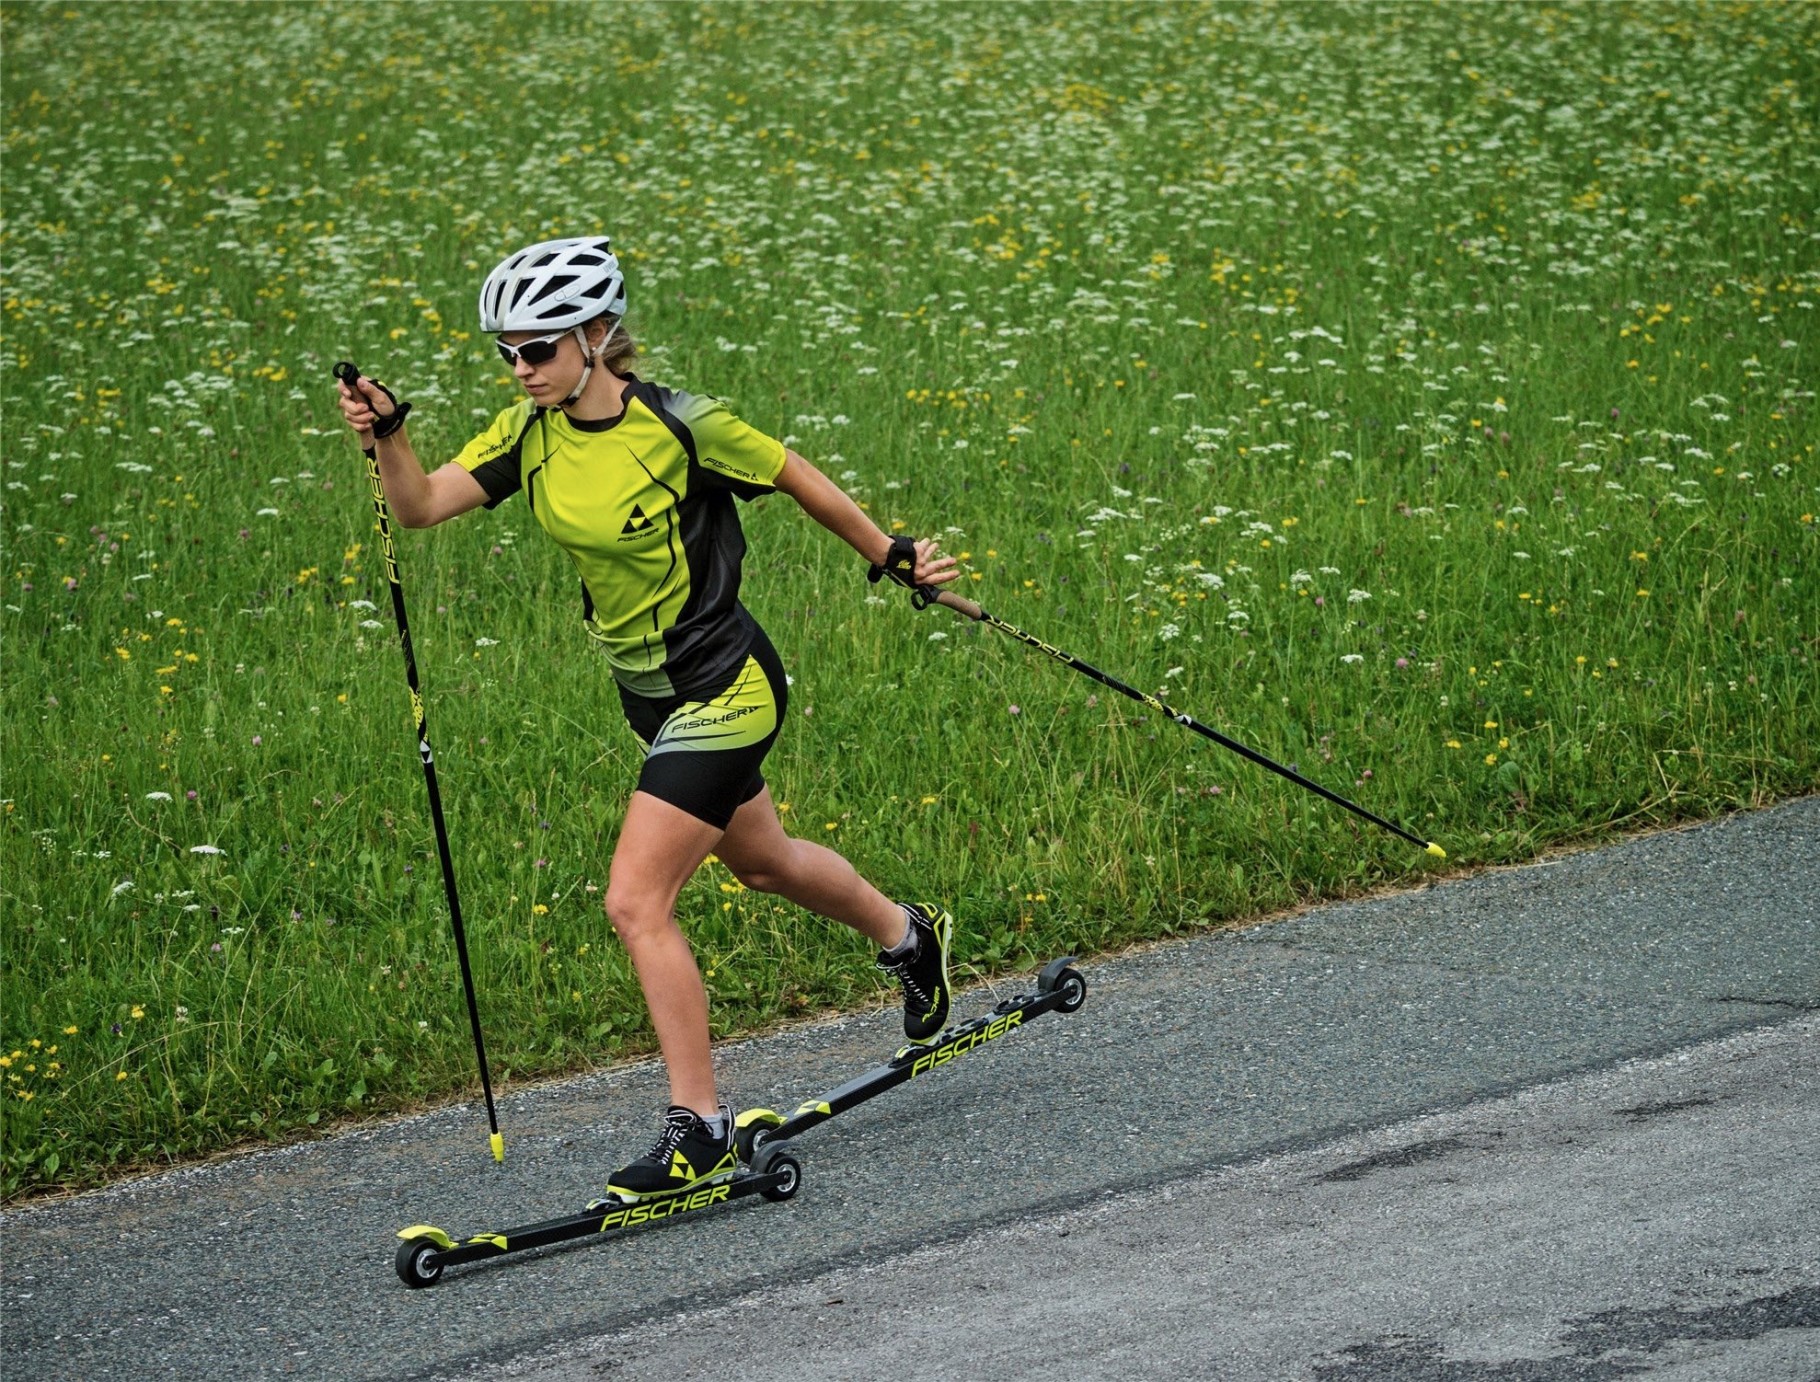 Rollerskiing Getting Fit for Cross Country Skiing